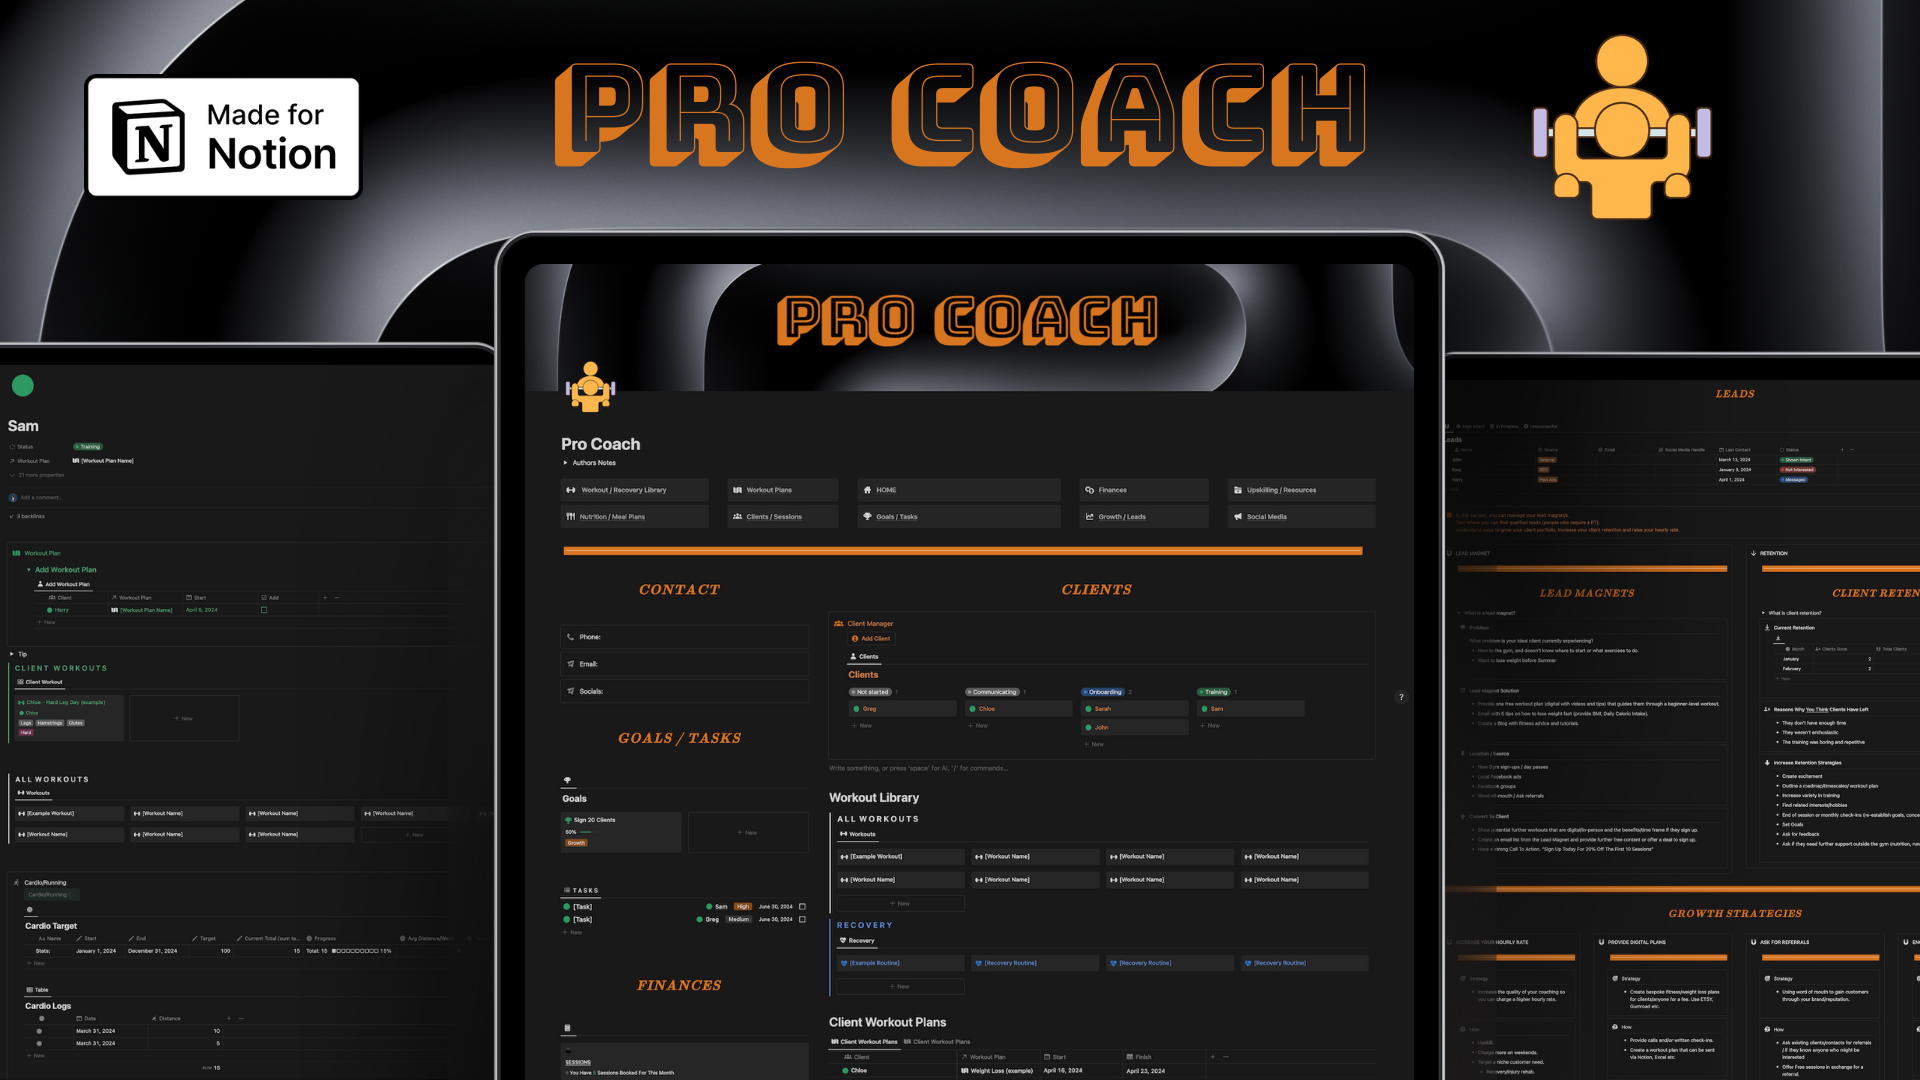 Pro Coach is the all-in-one dashboard every PT needs to turn pro with their personal training business. It makes it easier to manage existing clients and offers several tools to upgrade your service, charge more, get more clients and build your brand.
